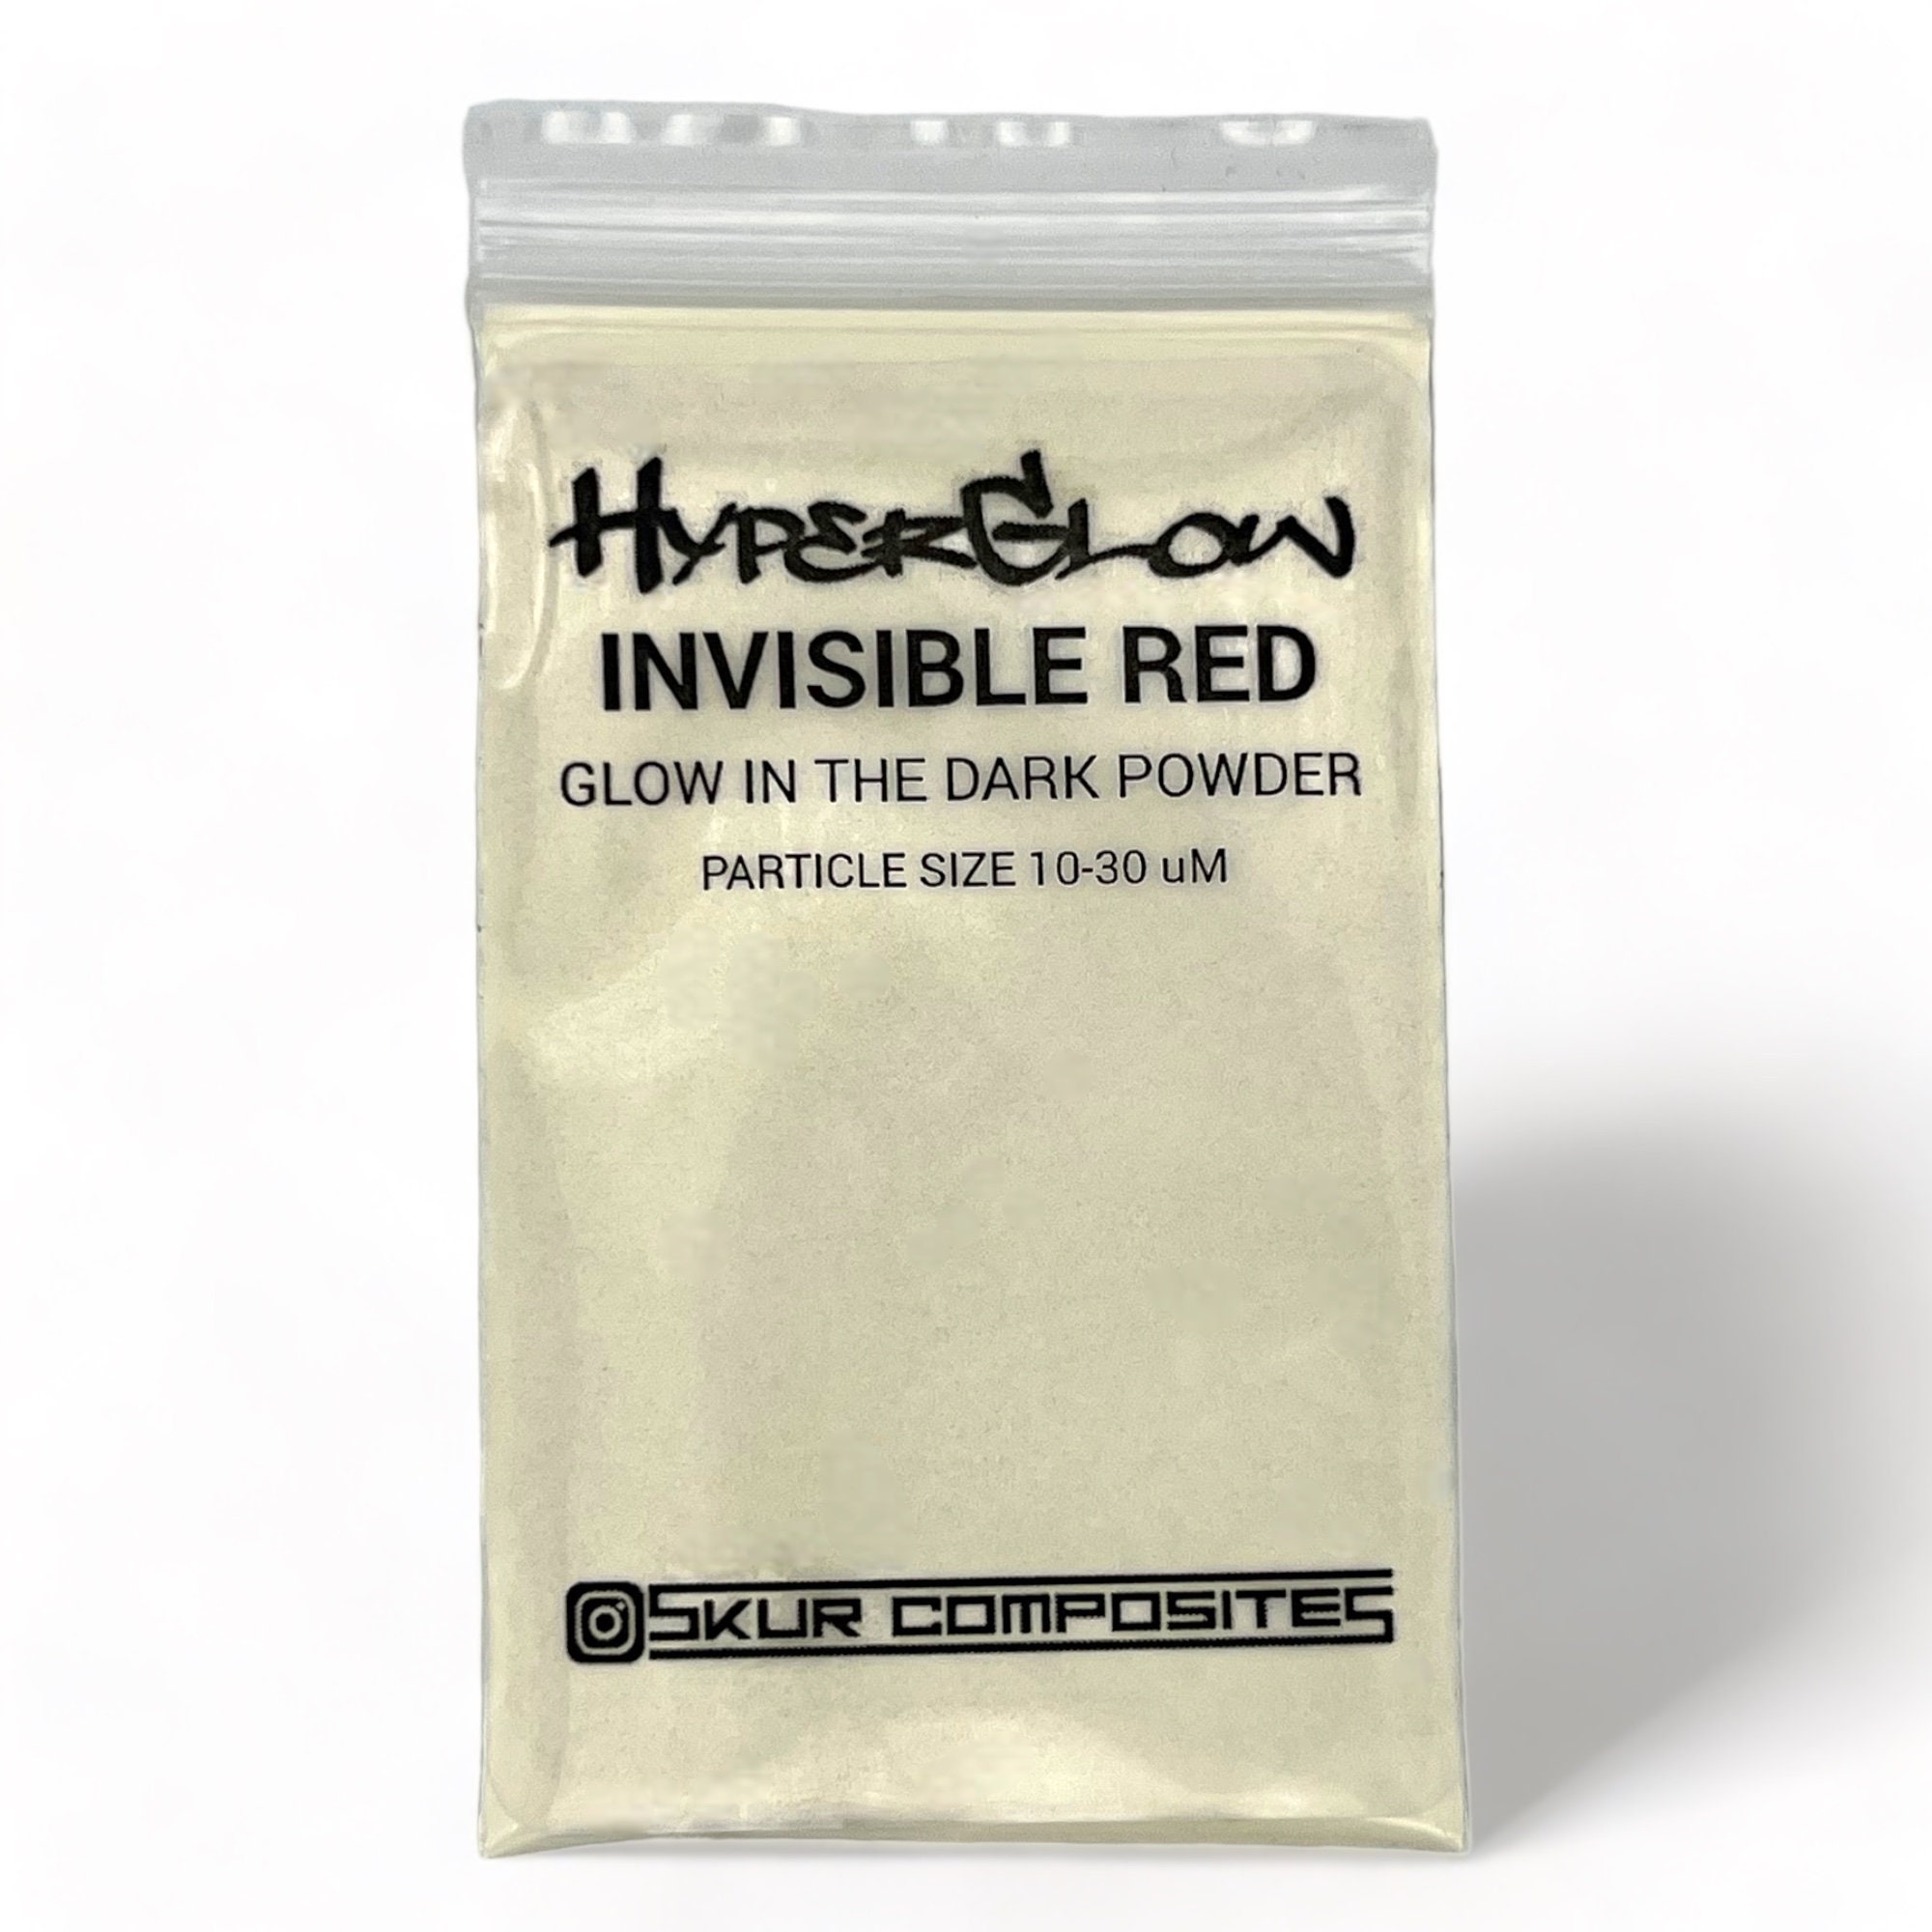 Hyperglow INVISIBLE RED Glow in the Dark POWDER Skur Composites